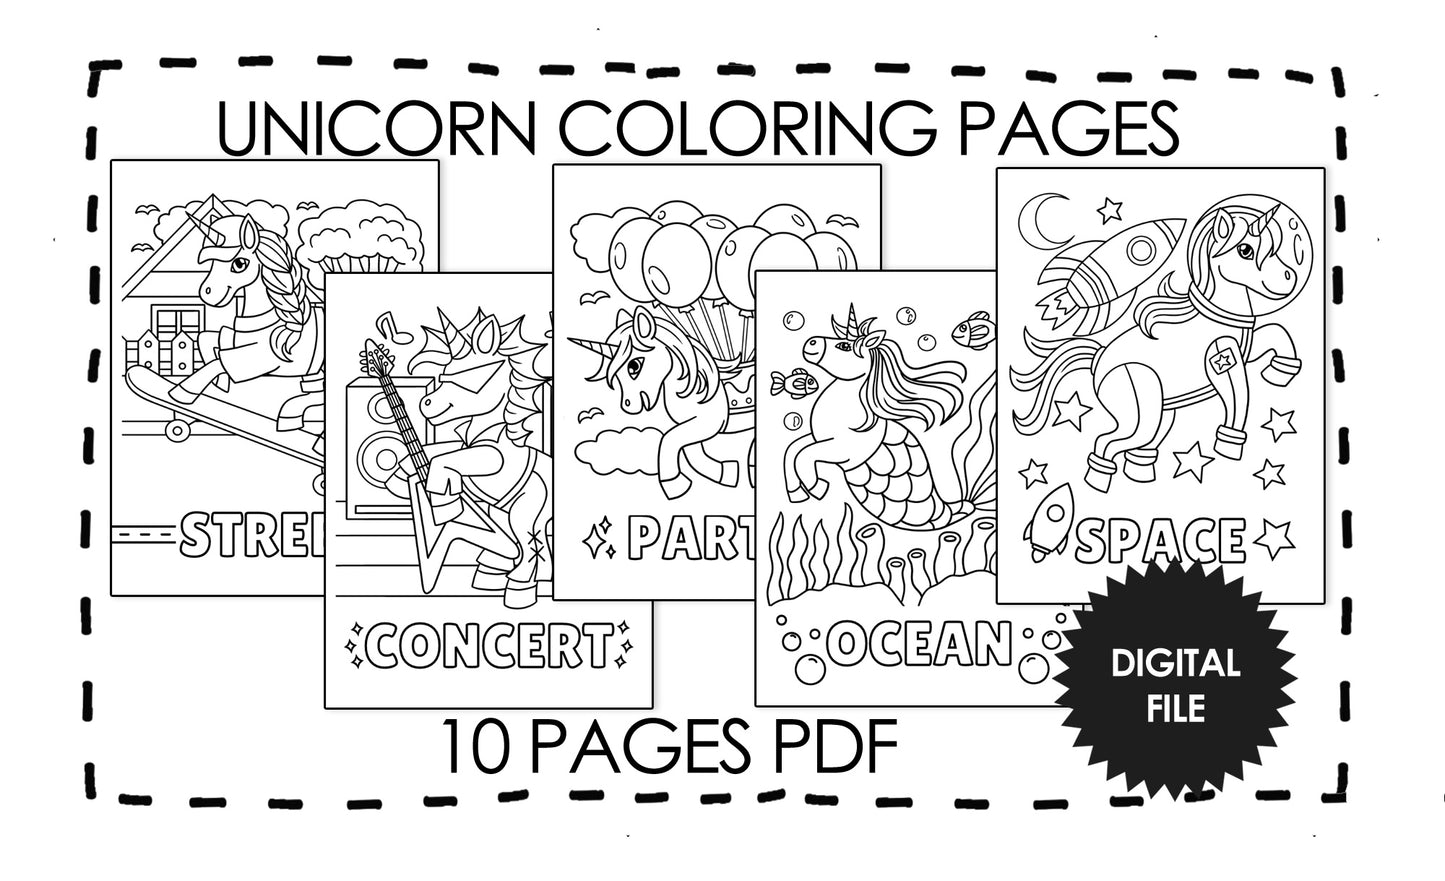 Unicorn Coloring Pages for Kids, Pony Coloring Book, Activities For Kids Instant Download 10 pages PDF Print At Home, Birthday Gift for Kids